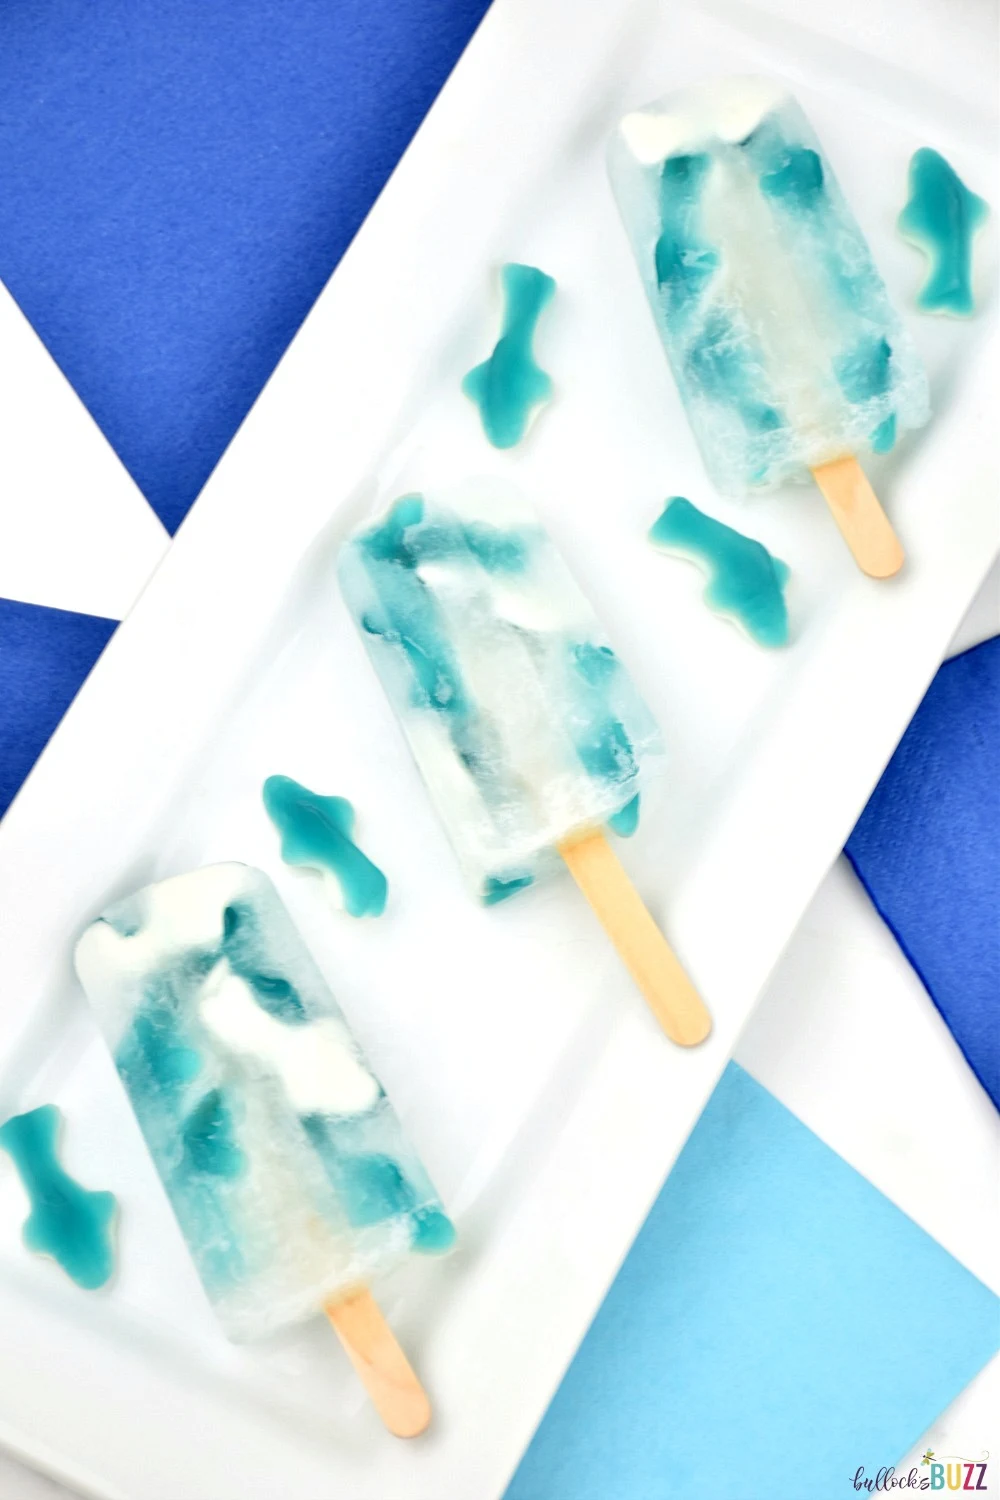 Perfect for Shark Week or an ocean themed party, fruit flavored gummy sharks are submerged in lemon-lime soda and frozen in this tasty Great White Gummy Shark Popsicle recipe.